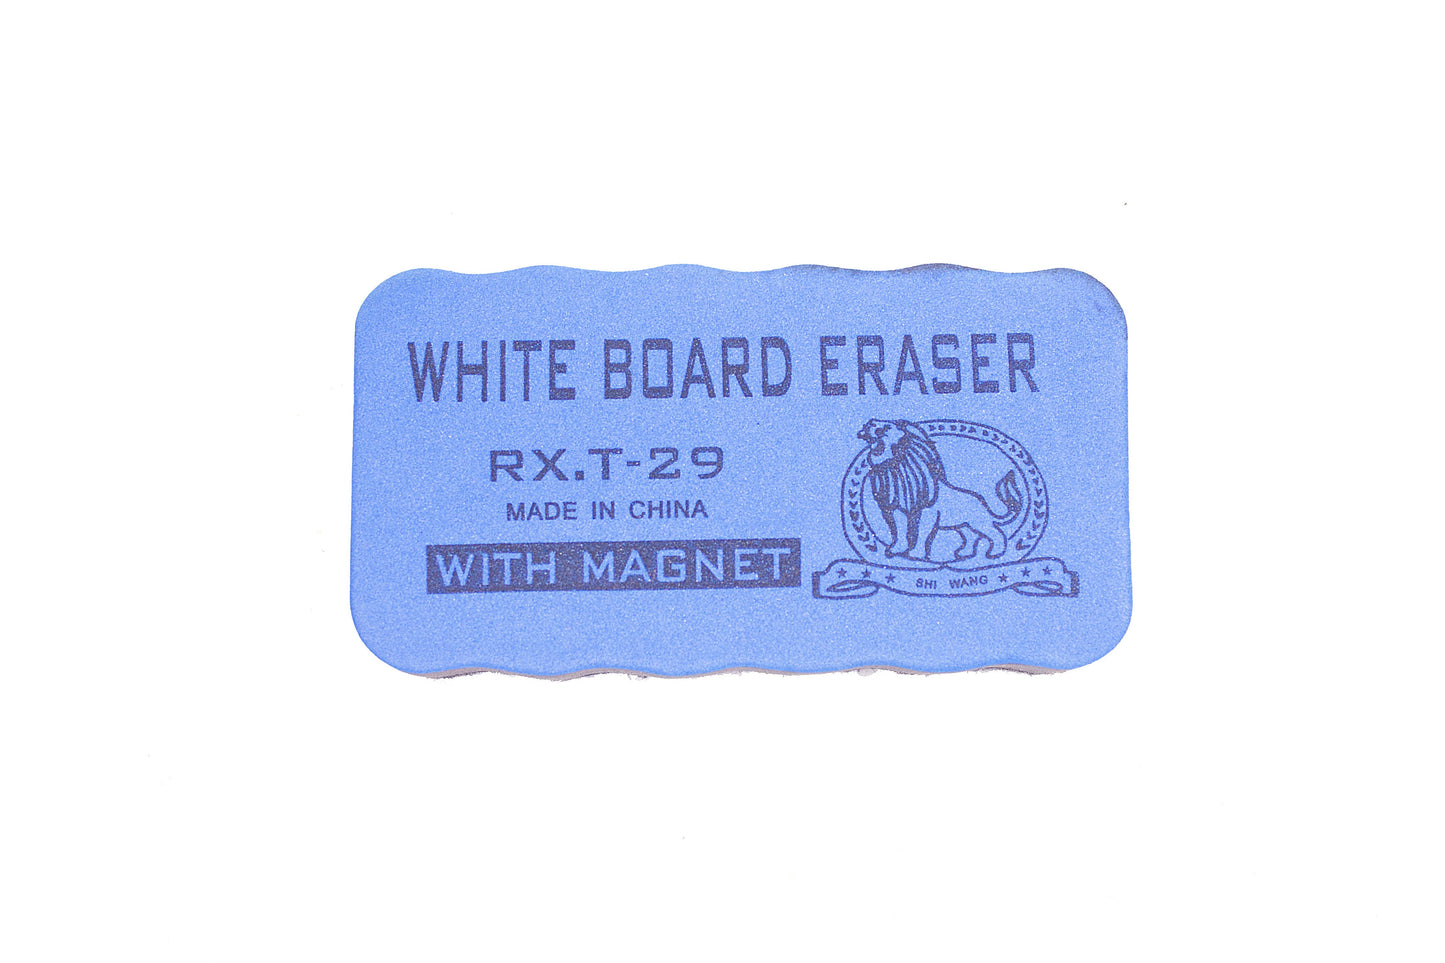 Whiteboard Eraser T-29 with Magnet | 12pcs